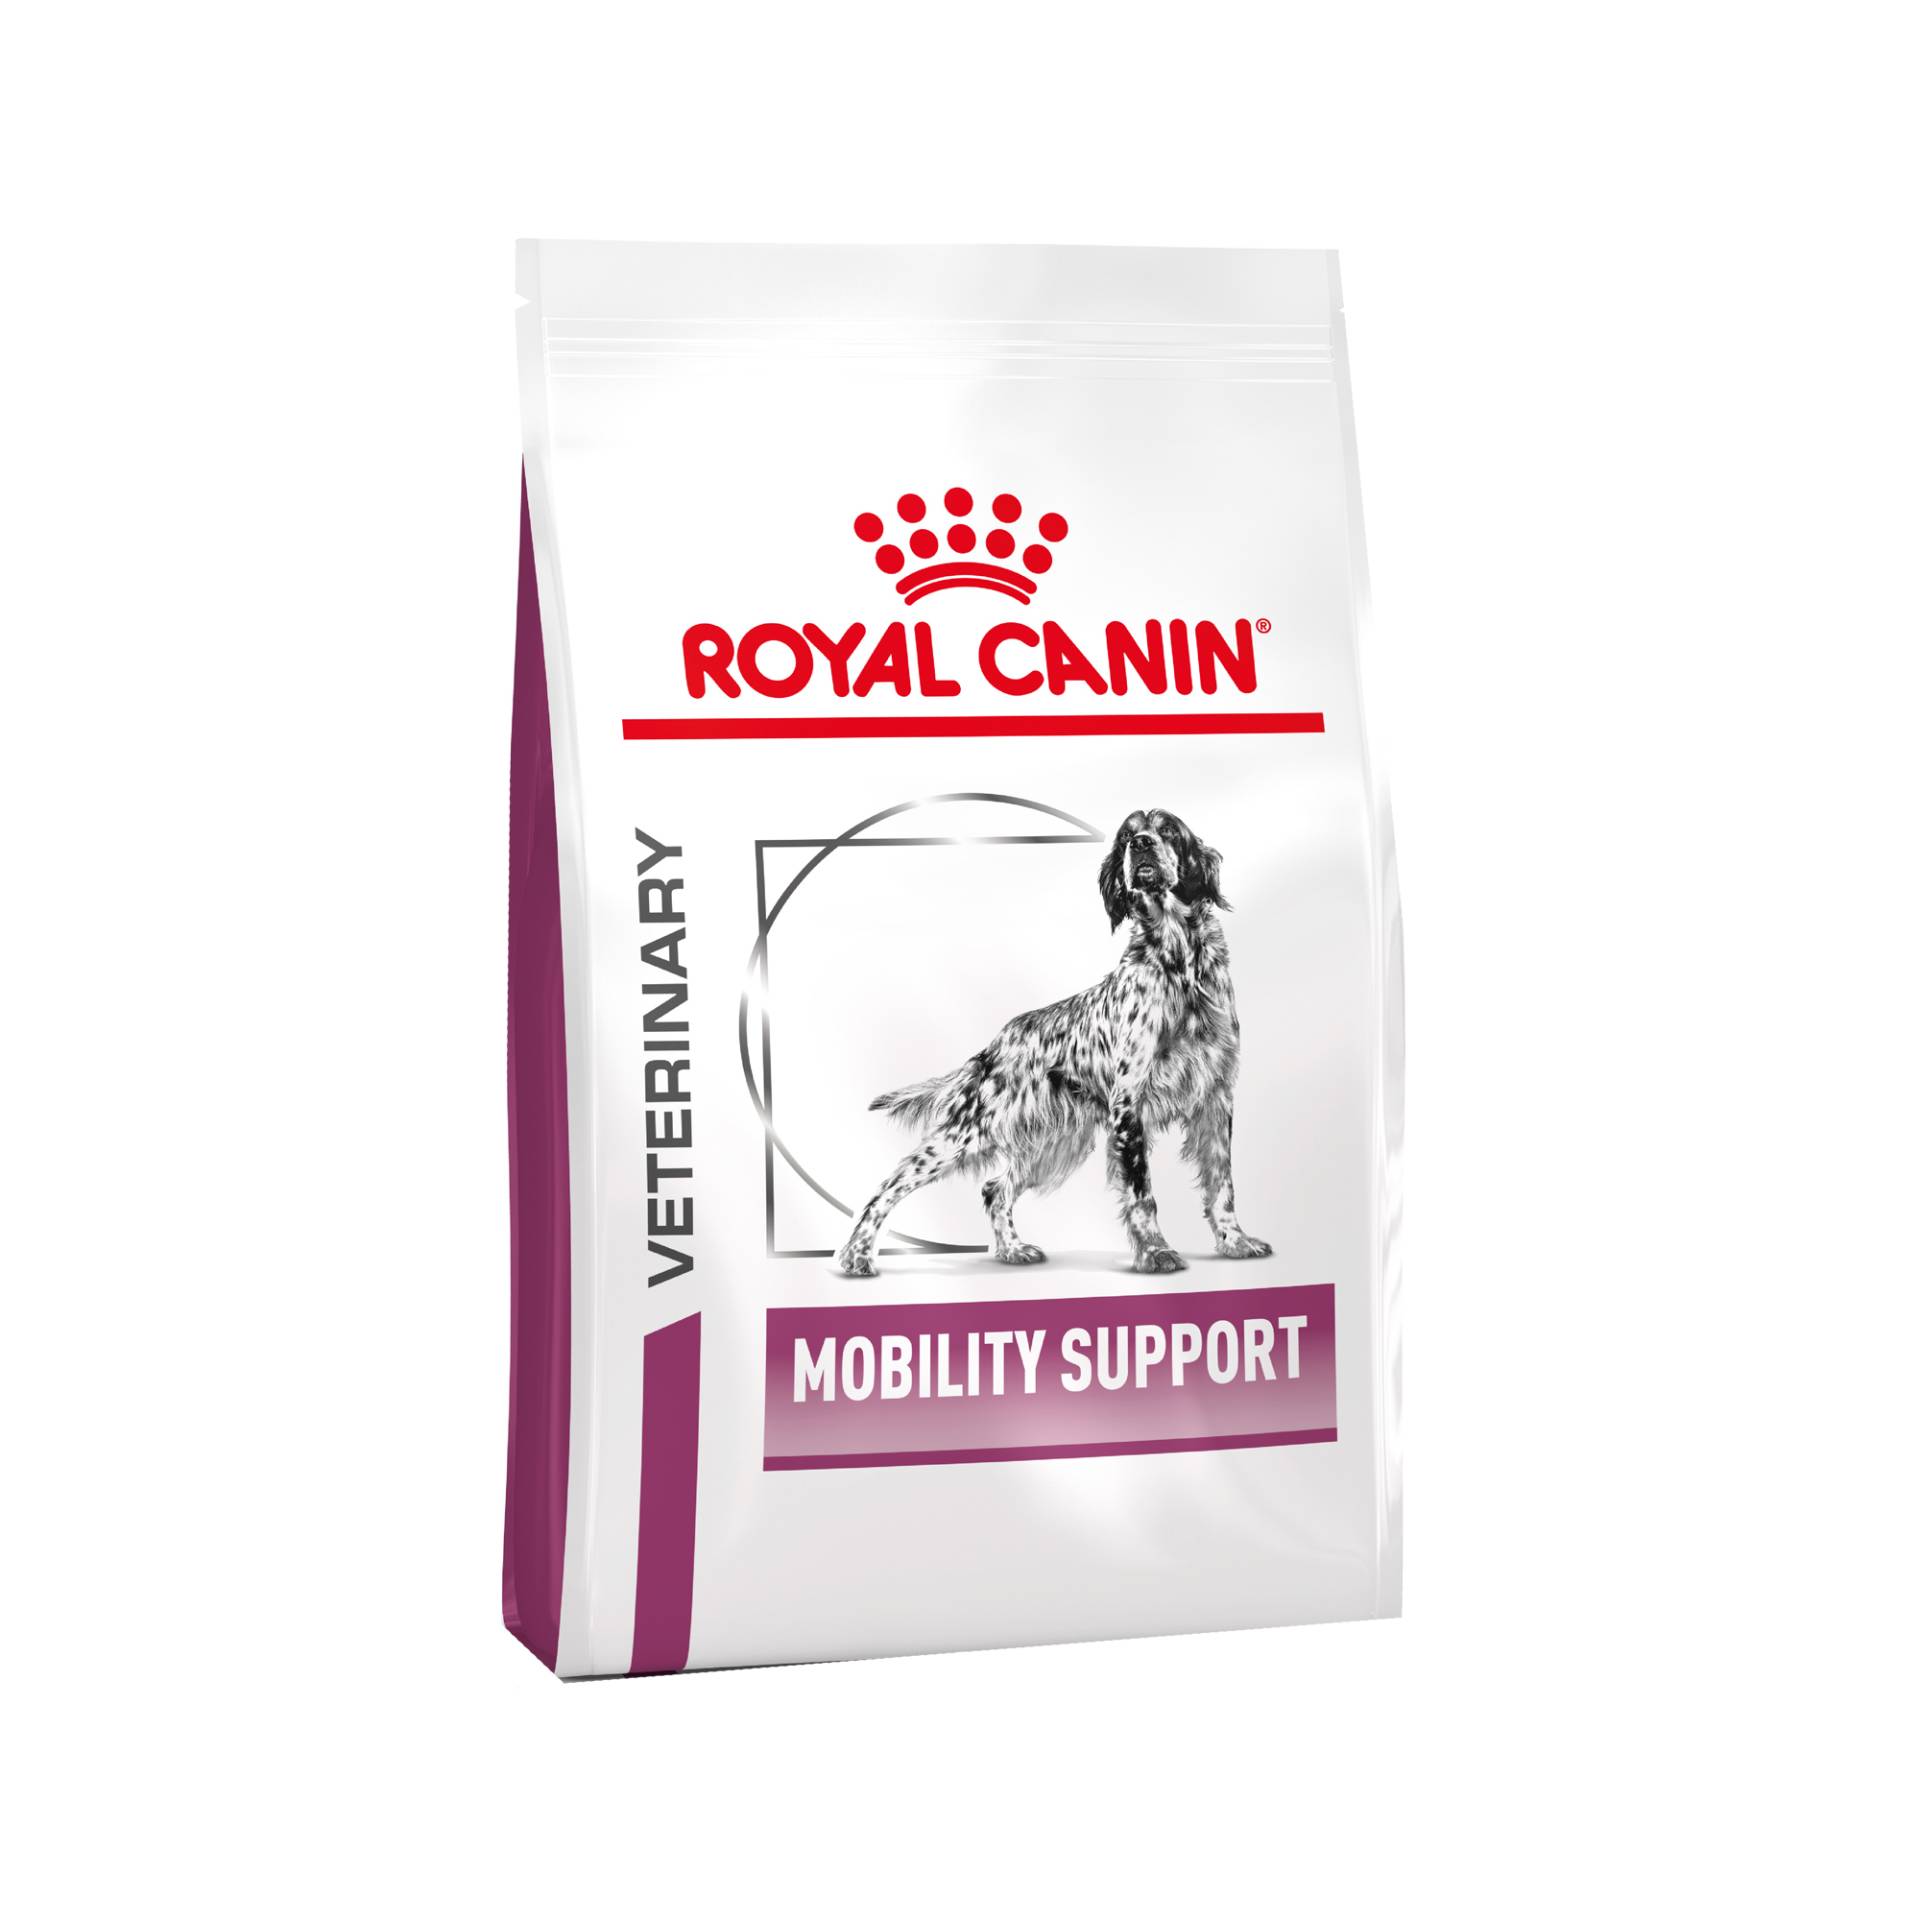 Royal Canin VHN Mobility Support - 2 kg von Royal Canin